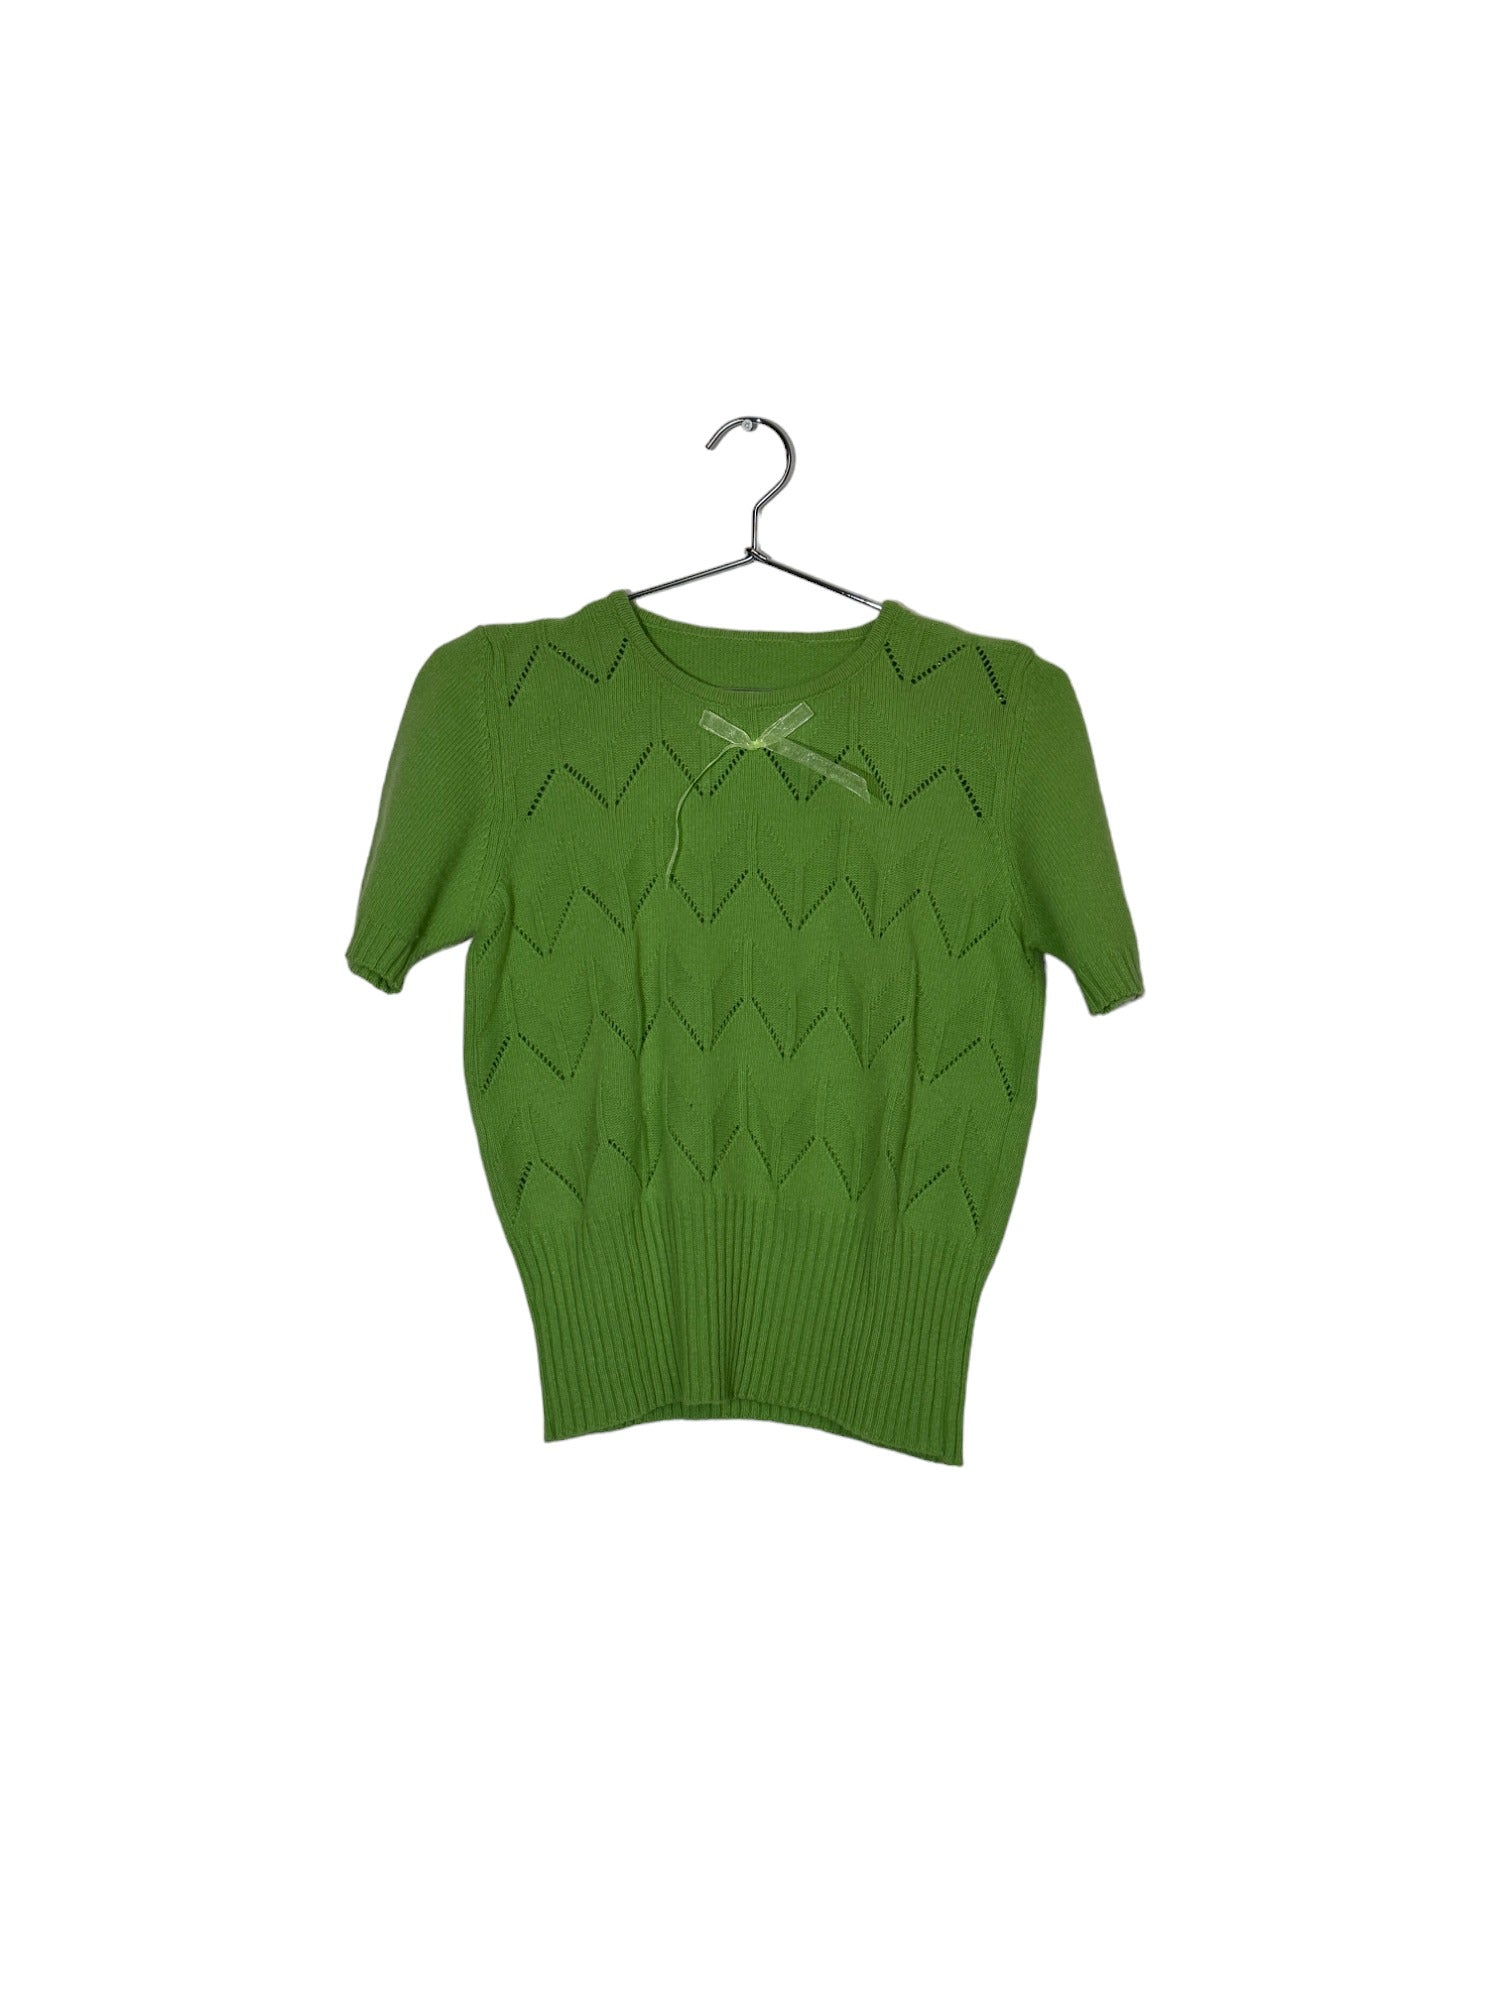 Green Soft Chevron Pattern Cinched Top with Bow